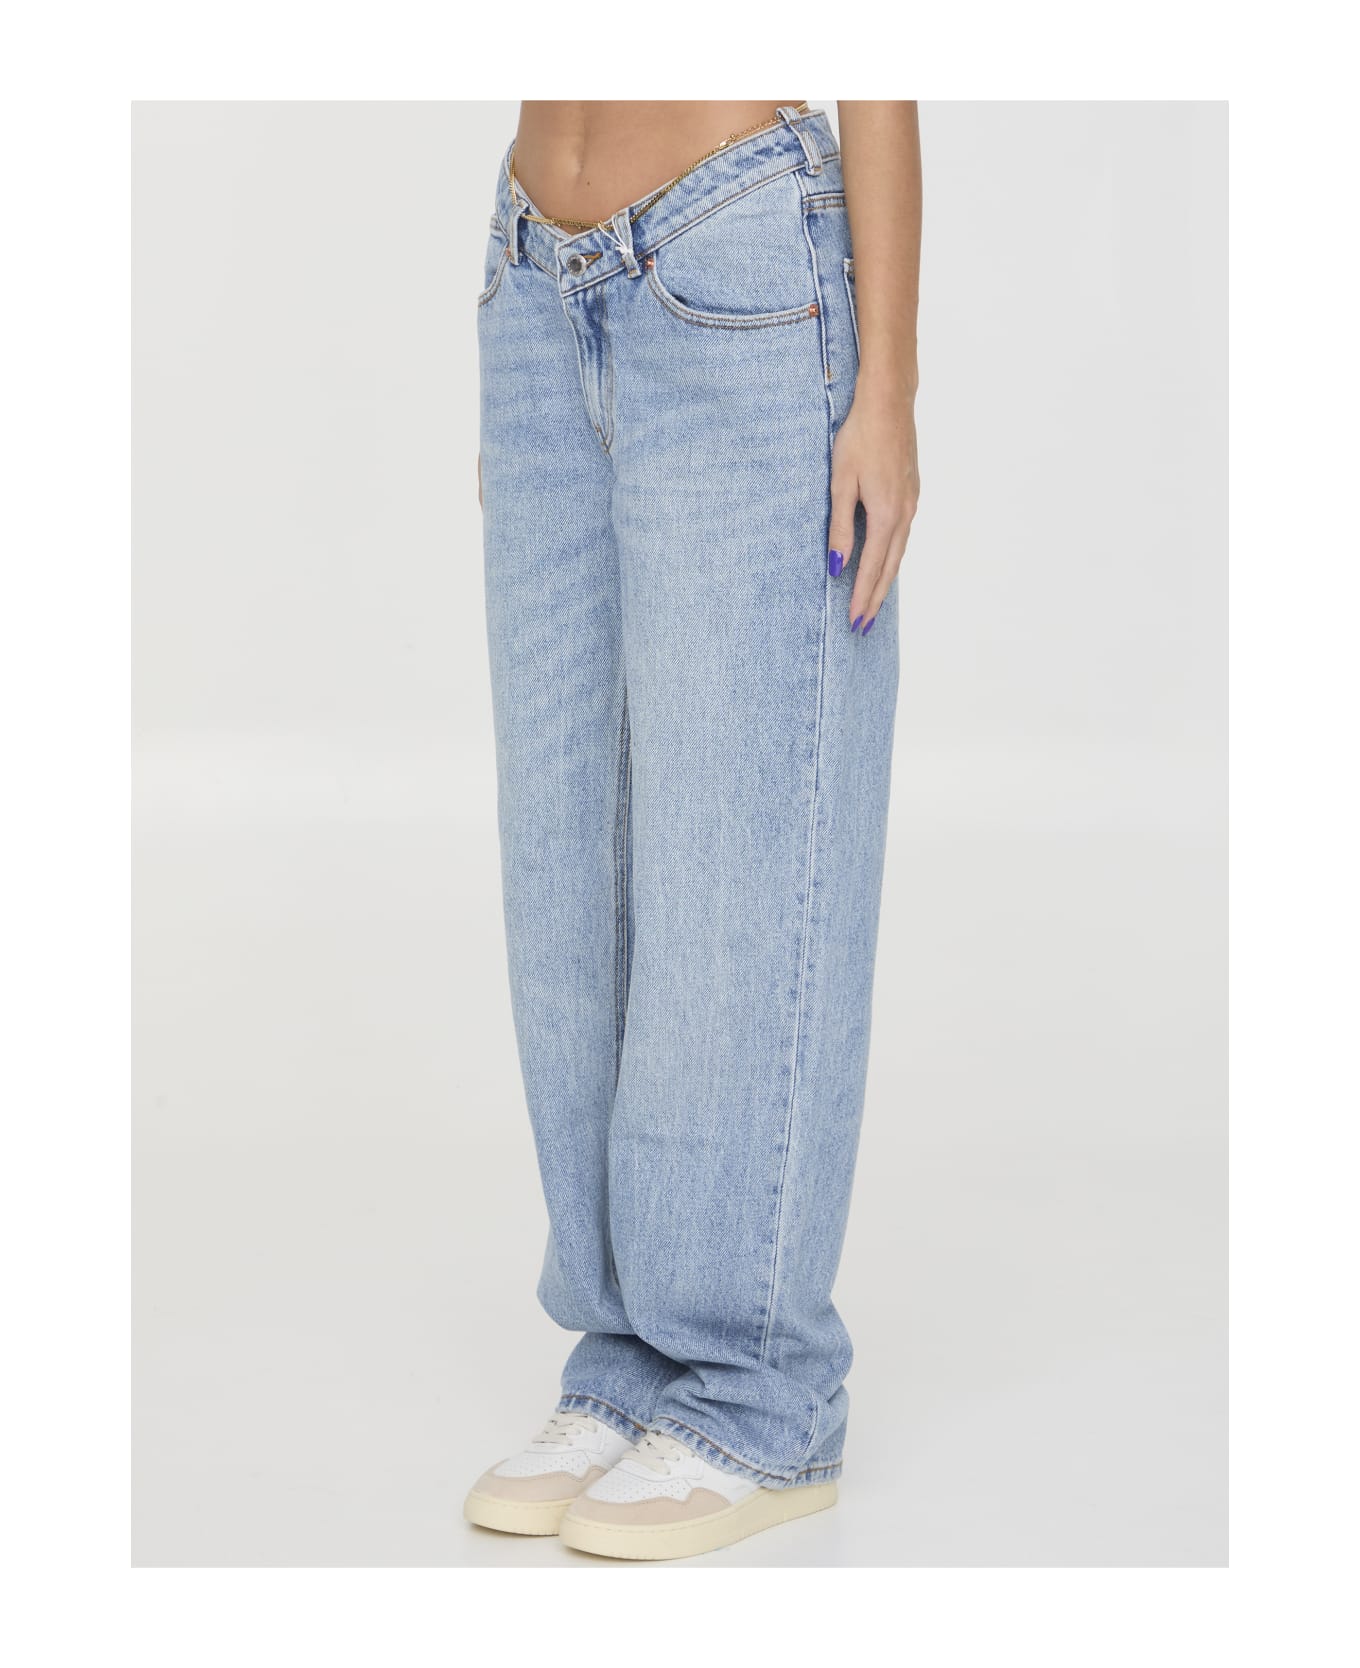 Alexander Wang Denim Jeans With Nameplate - A Vintage Faded Indigo